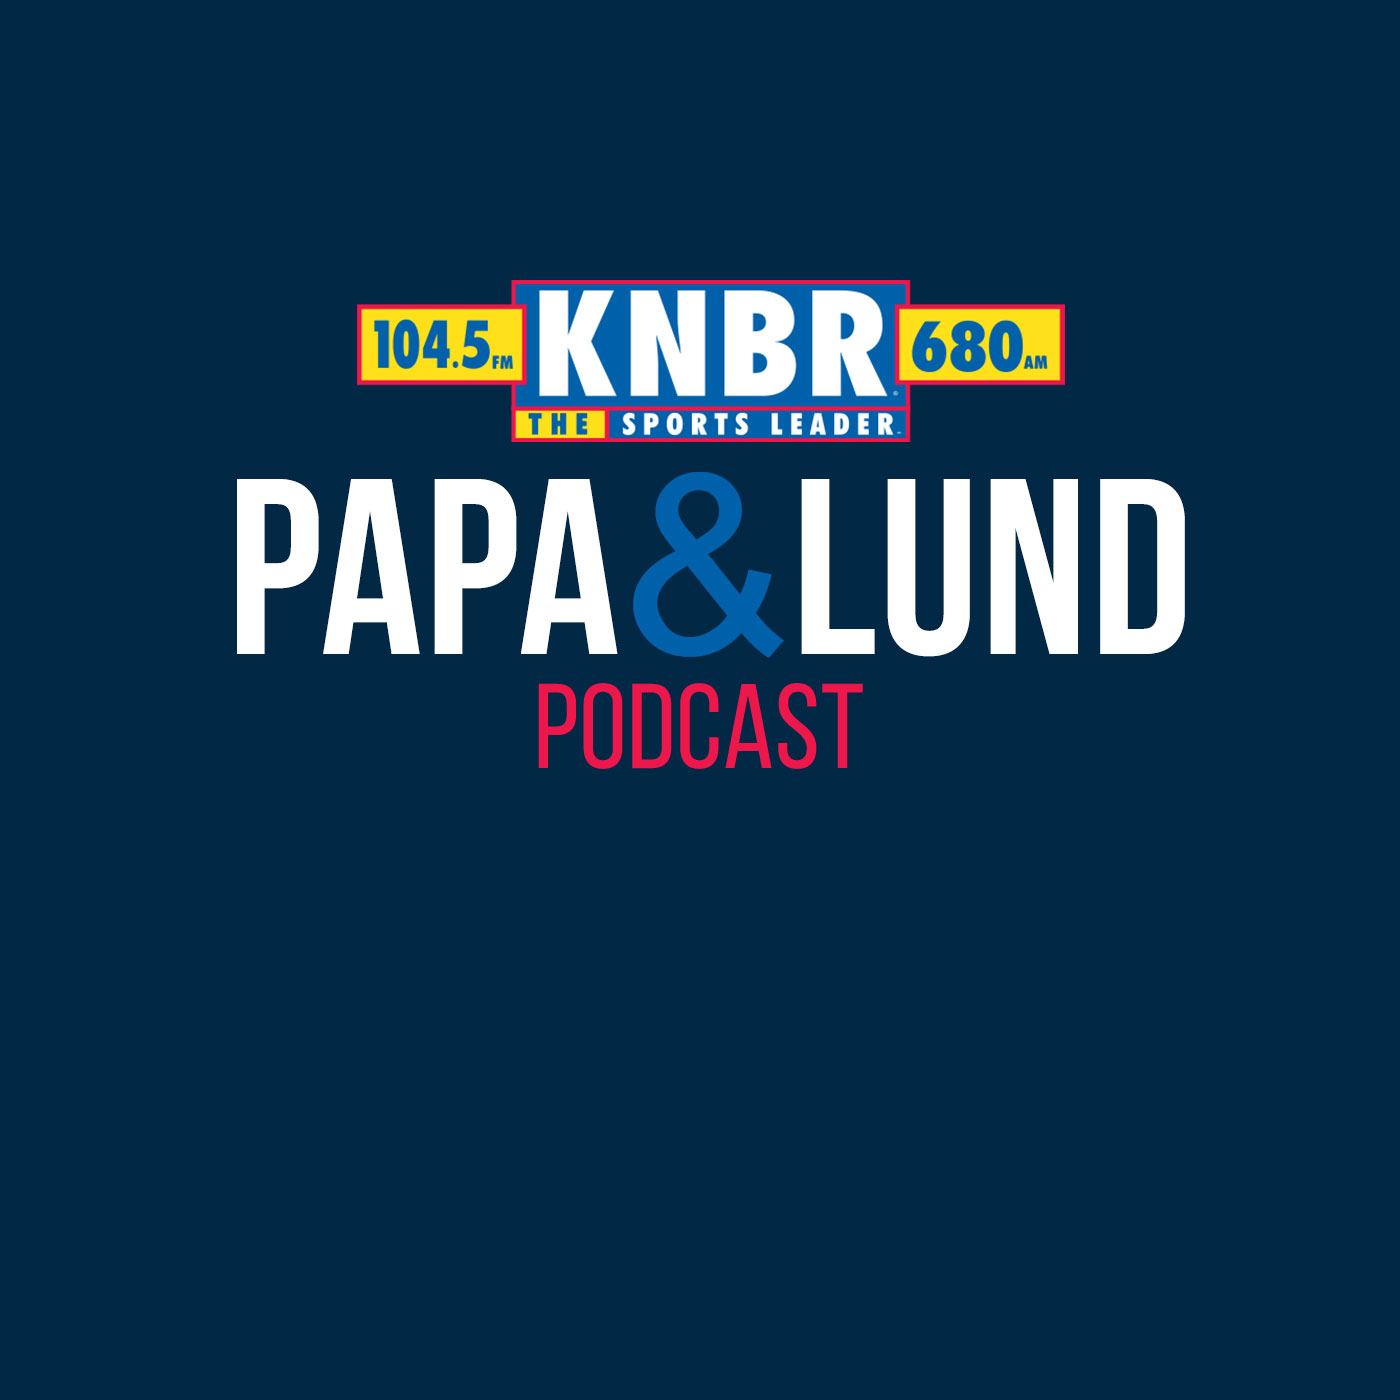 3-28 Shawn Estes joins Papa & Lund to discuss the upcoming 2023 season and the roster construction of the Opening Day Roster